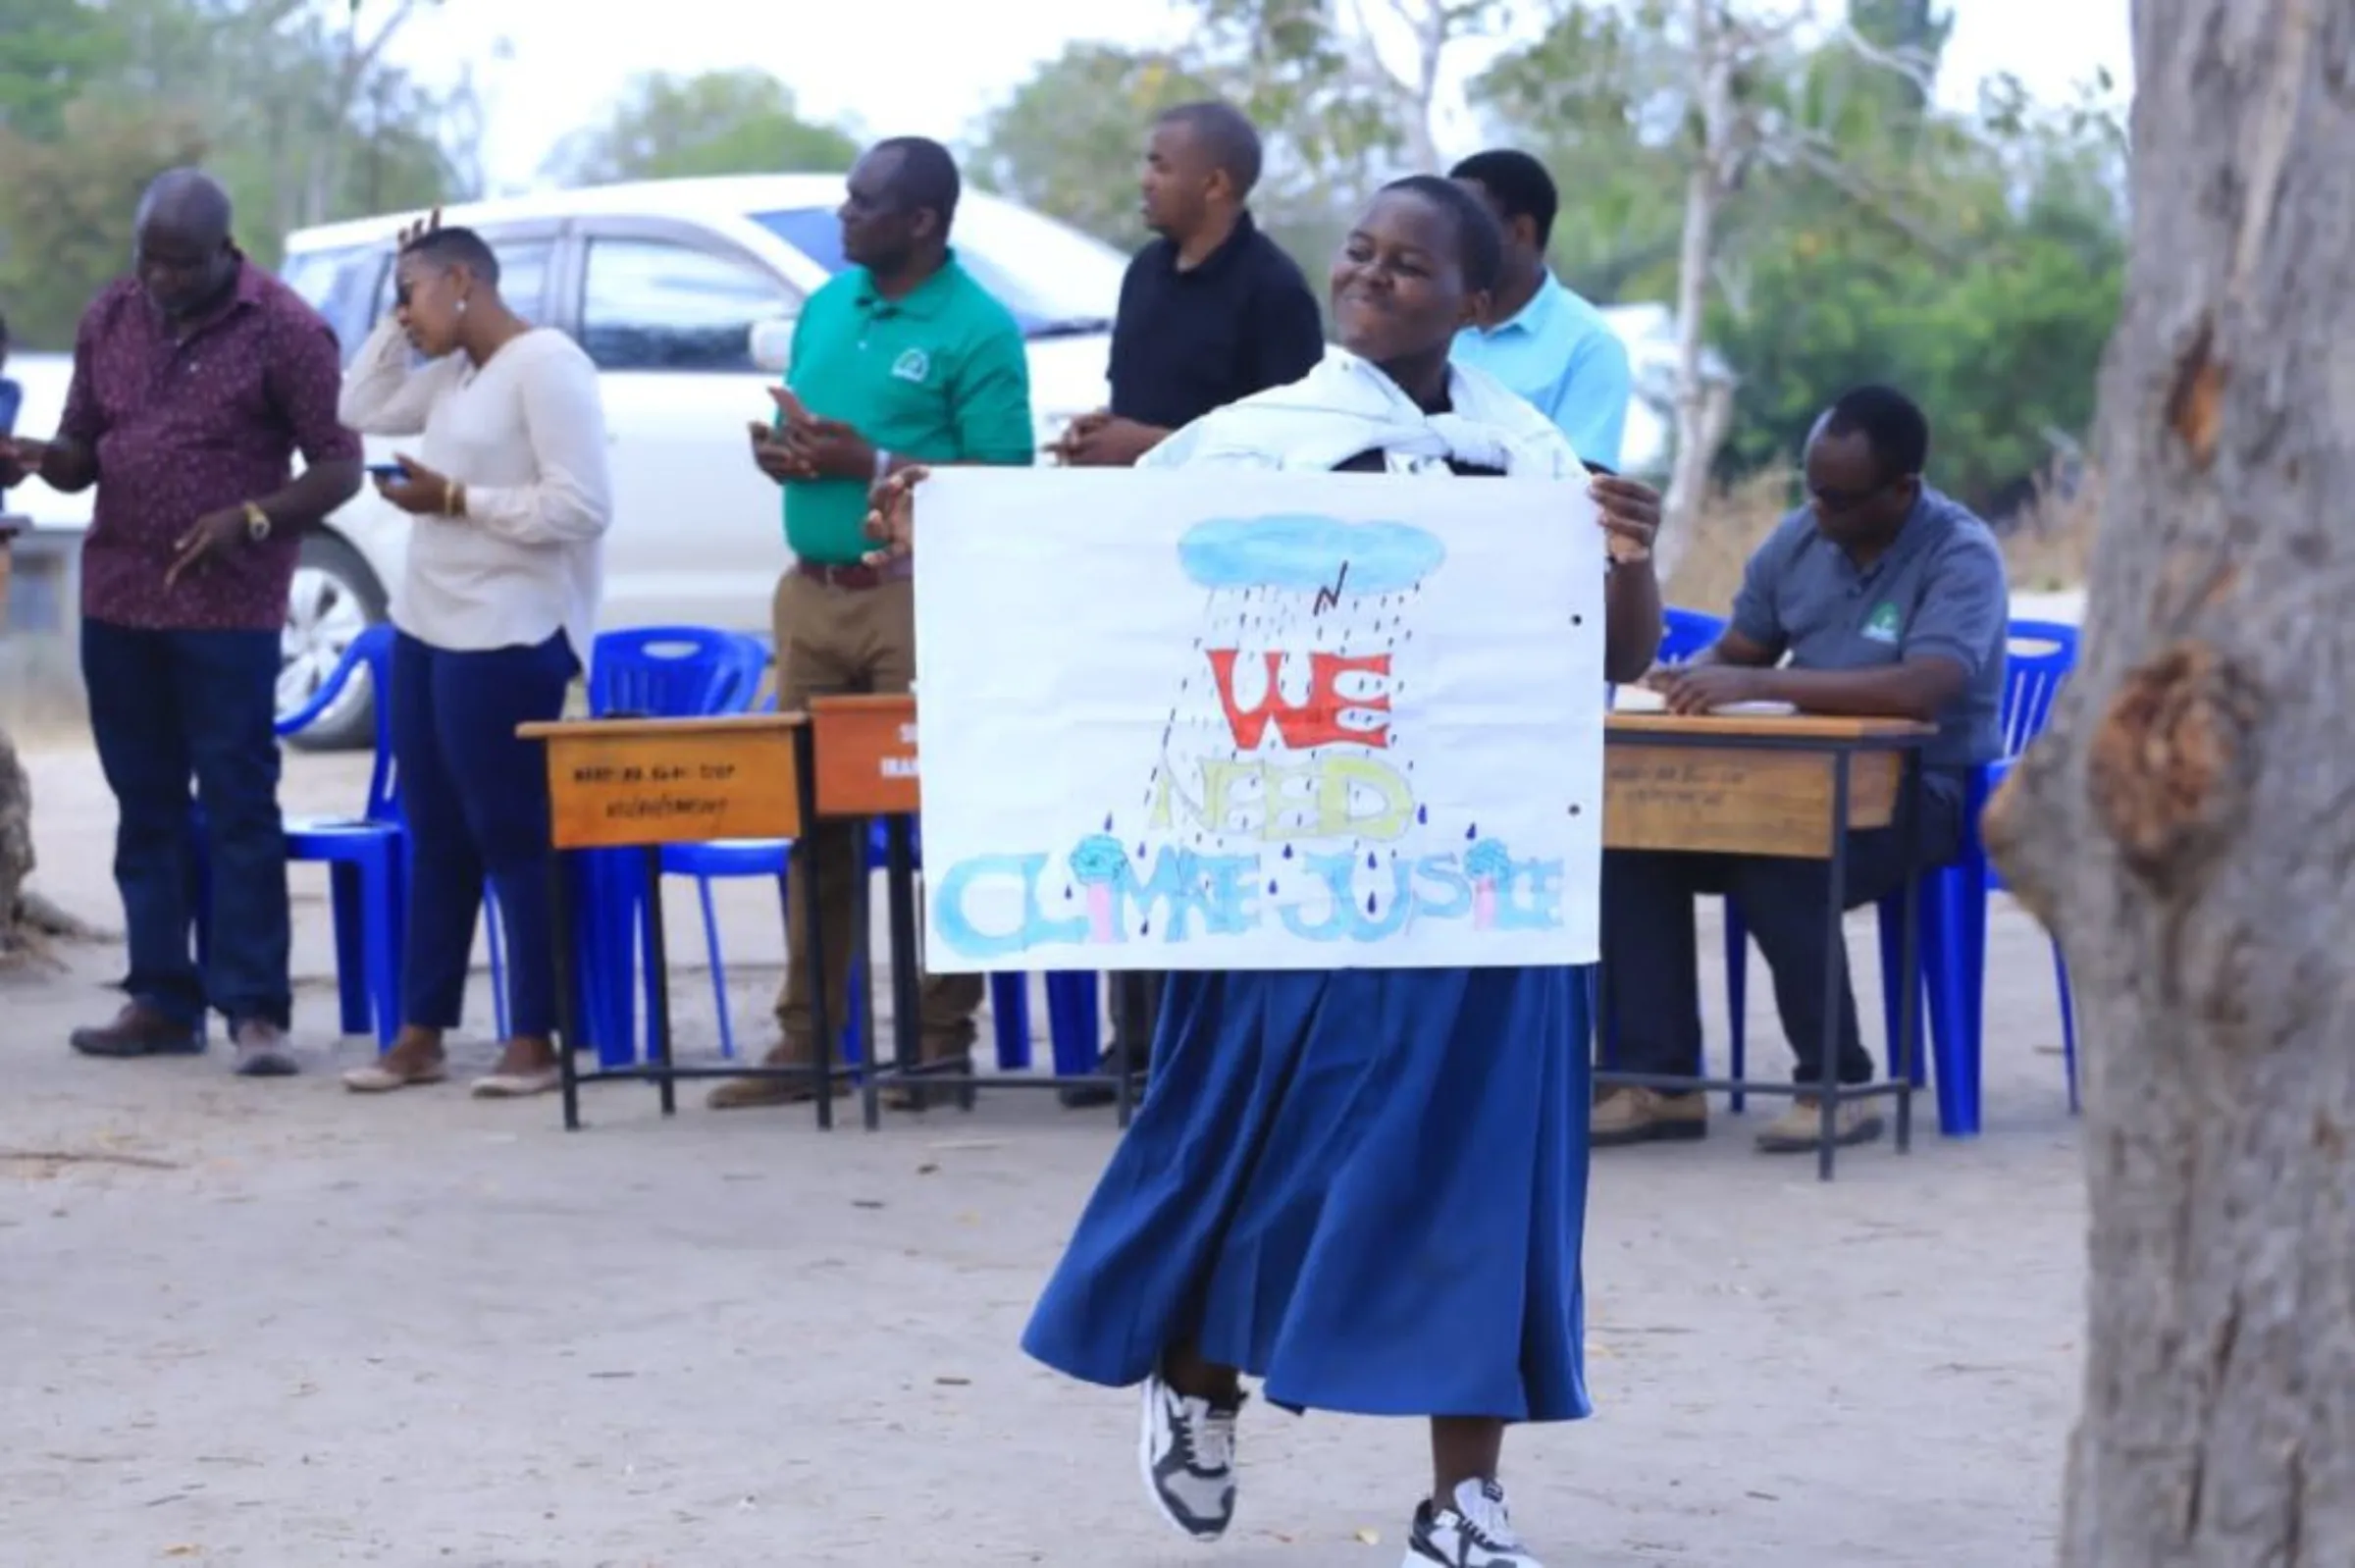 A student smiles while holding a climate protest sign at her school in the Kibaha district, Tanzania, October 9, 2022